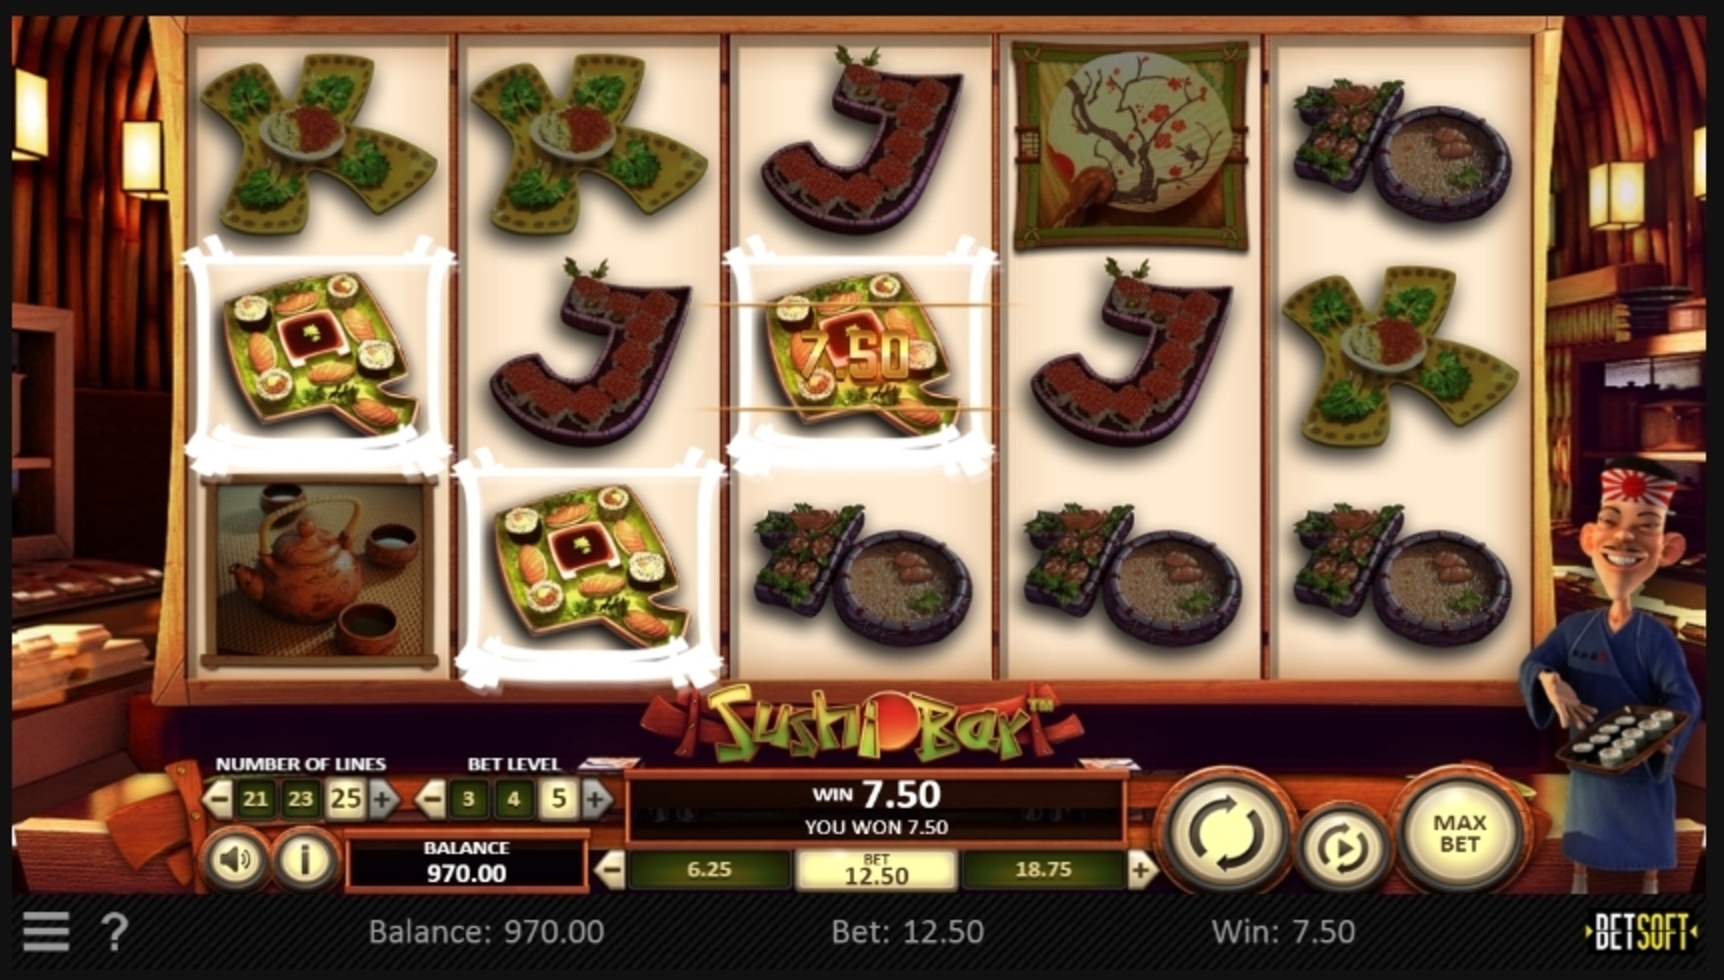 Win Money in Sushi Bar Free Slot Game by Betsoft